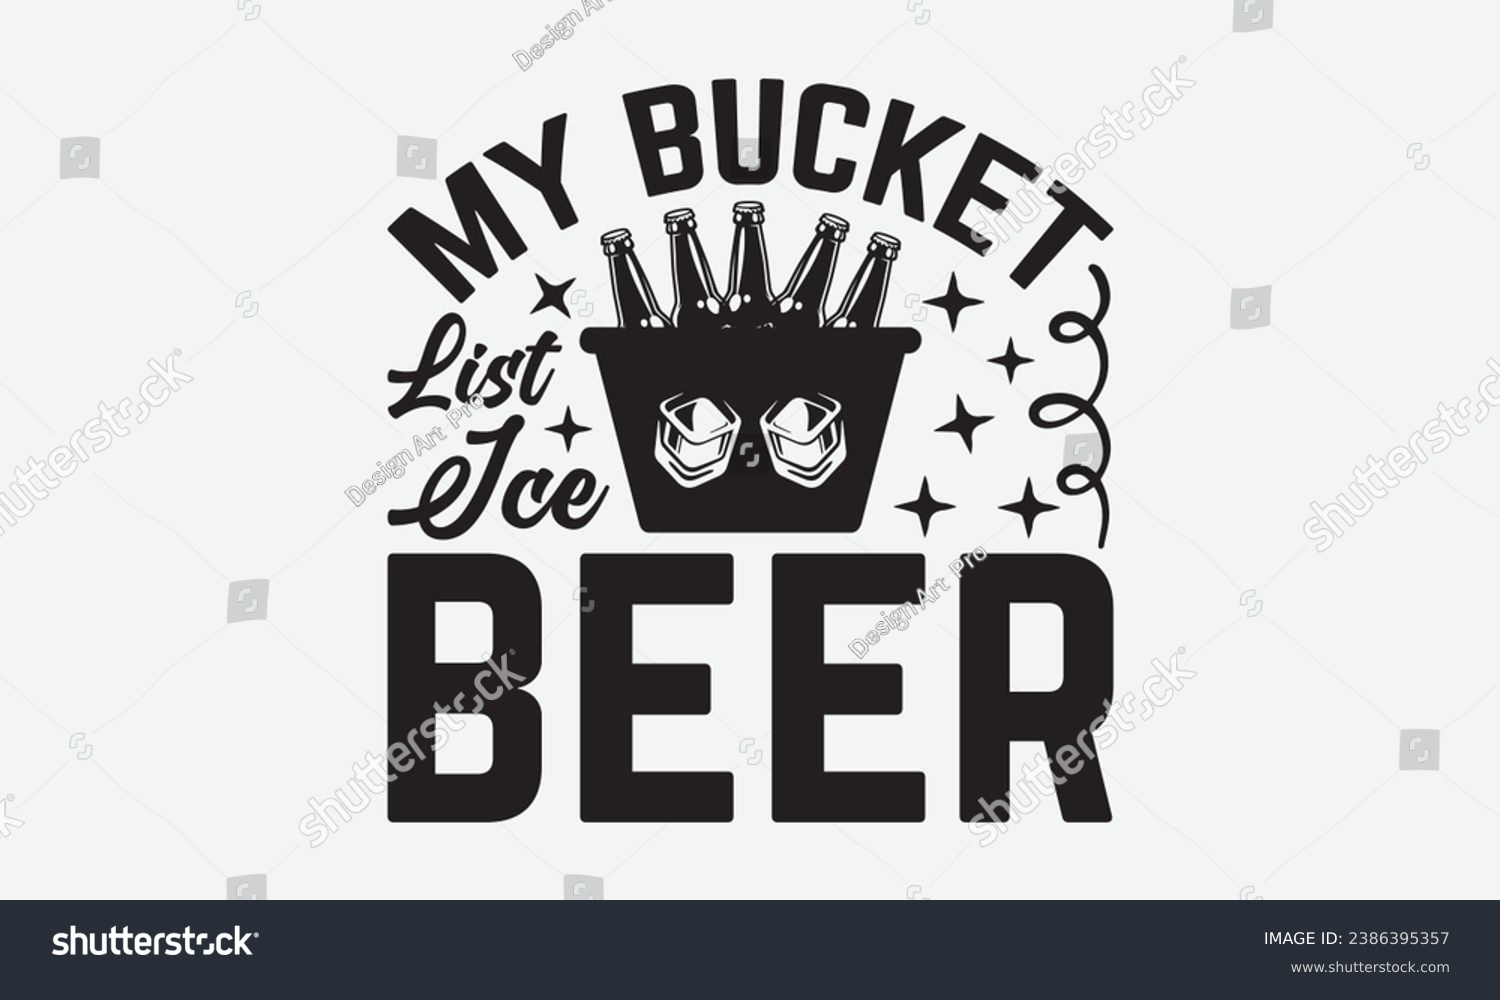 SVG of My Bucket List Ice Beer -Beer T-Shirt Design, Calligraphy Graphic Design, For Mugs, Pillows, Cutting Machine, Silhouette Cameo, Cricut. svg